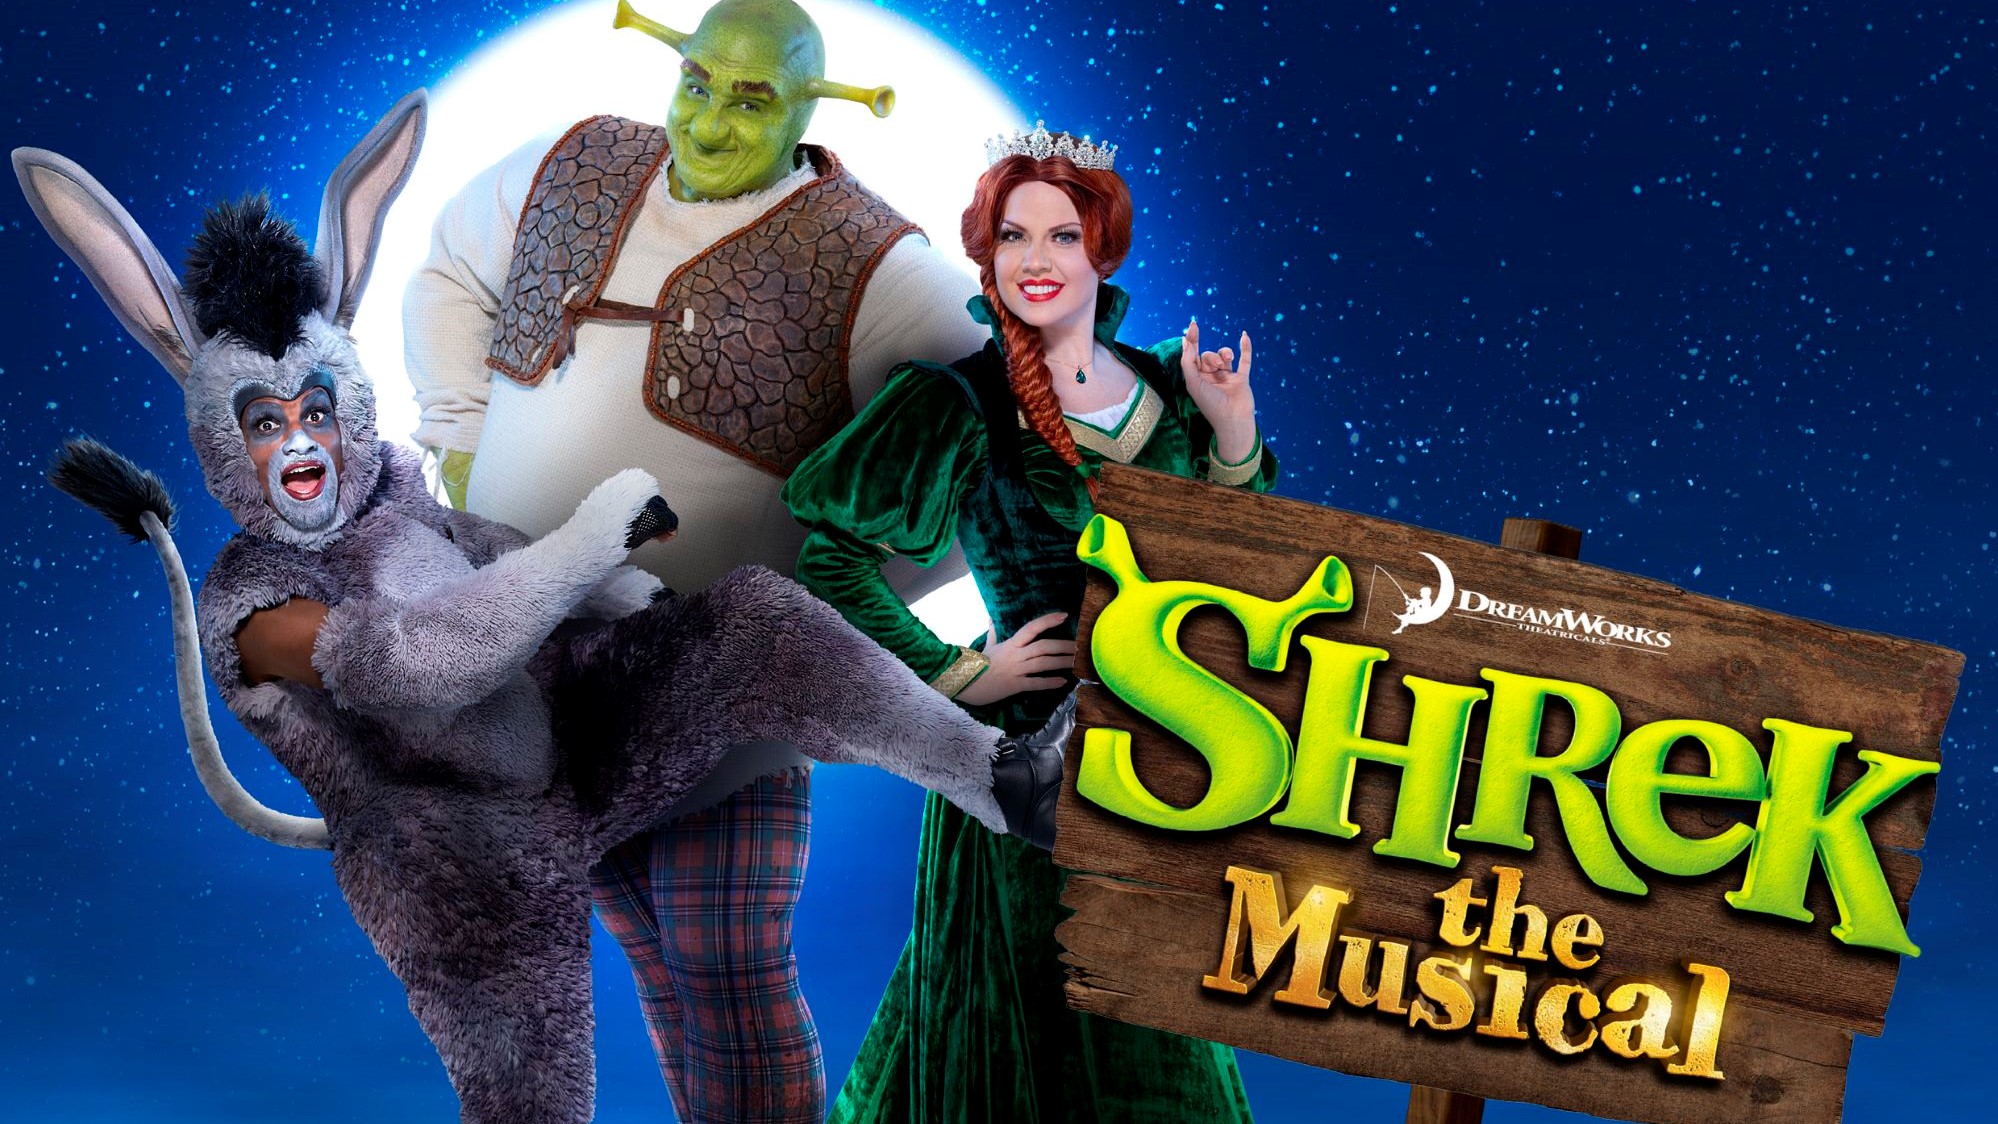 Shrek the Musical UK tour cast announced with Joanne Clifton Stageberry